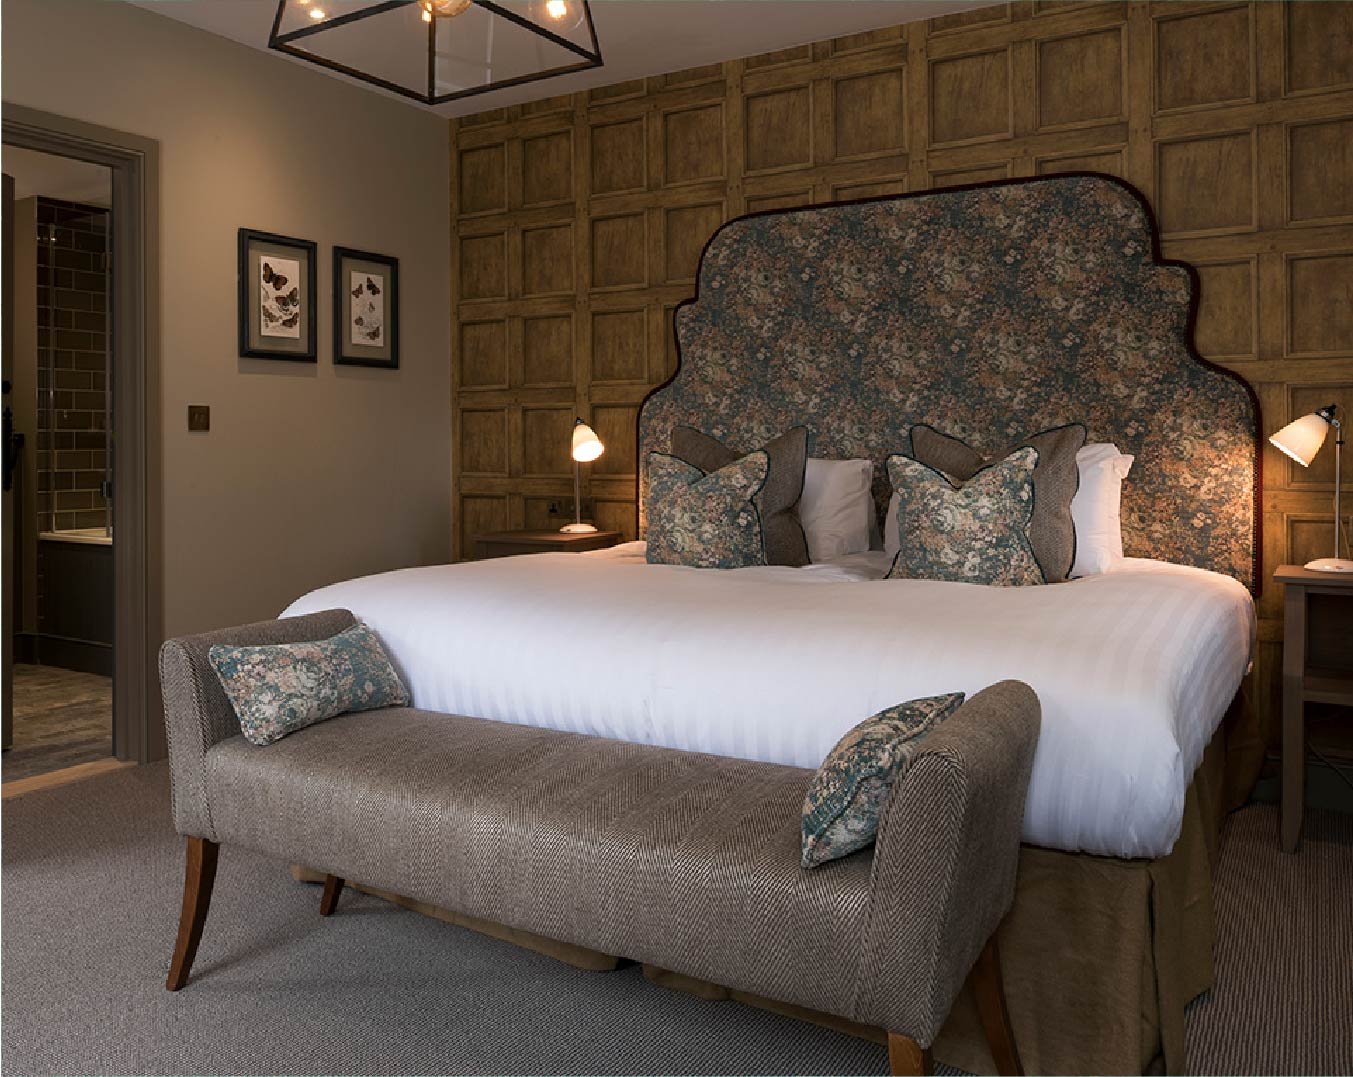 Cornwall Hotel Collection makes the perfect transition from Hotel Perfect 